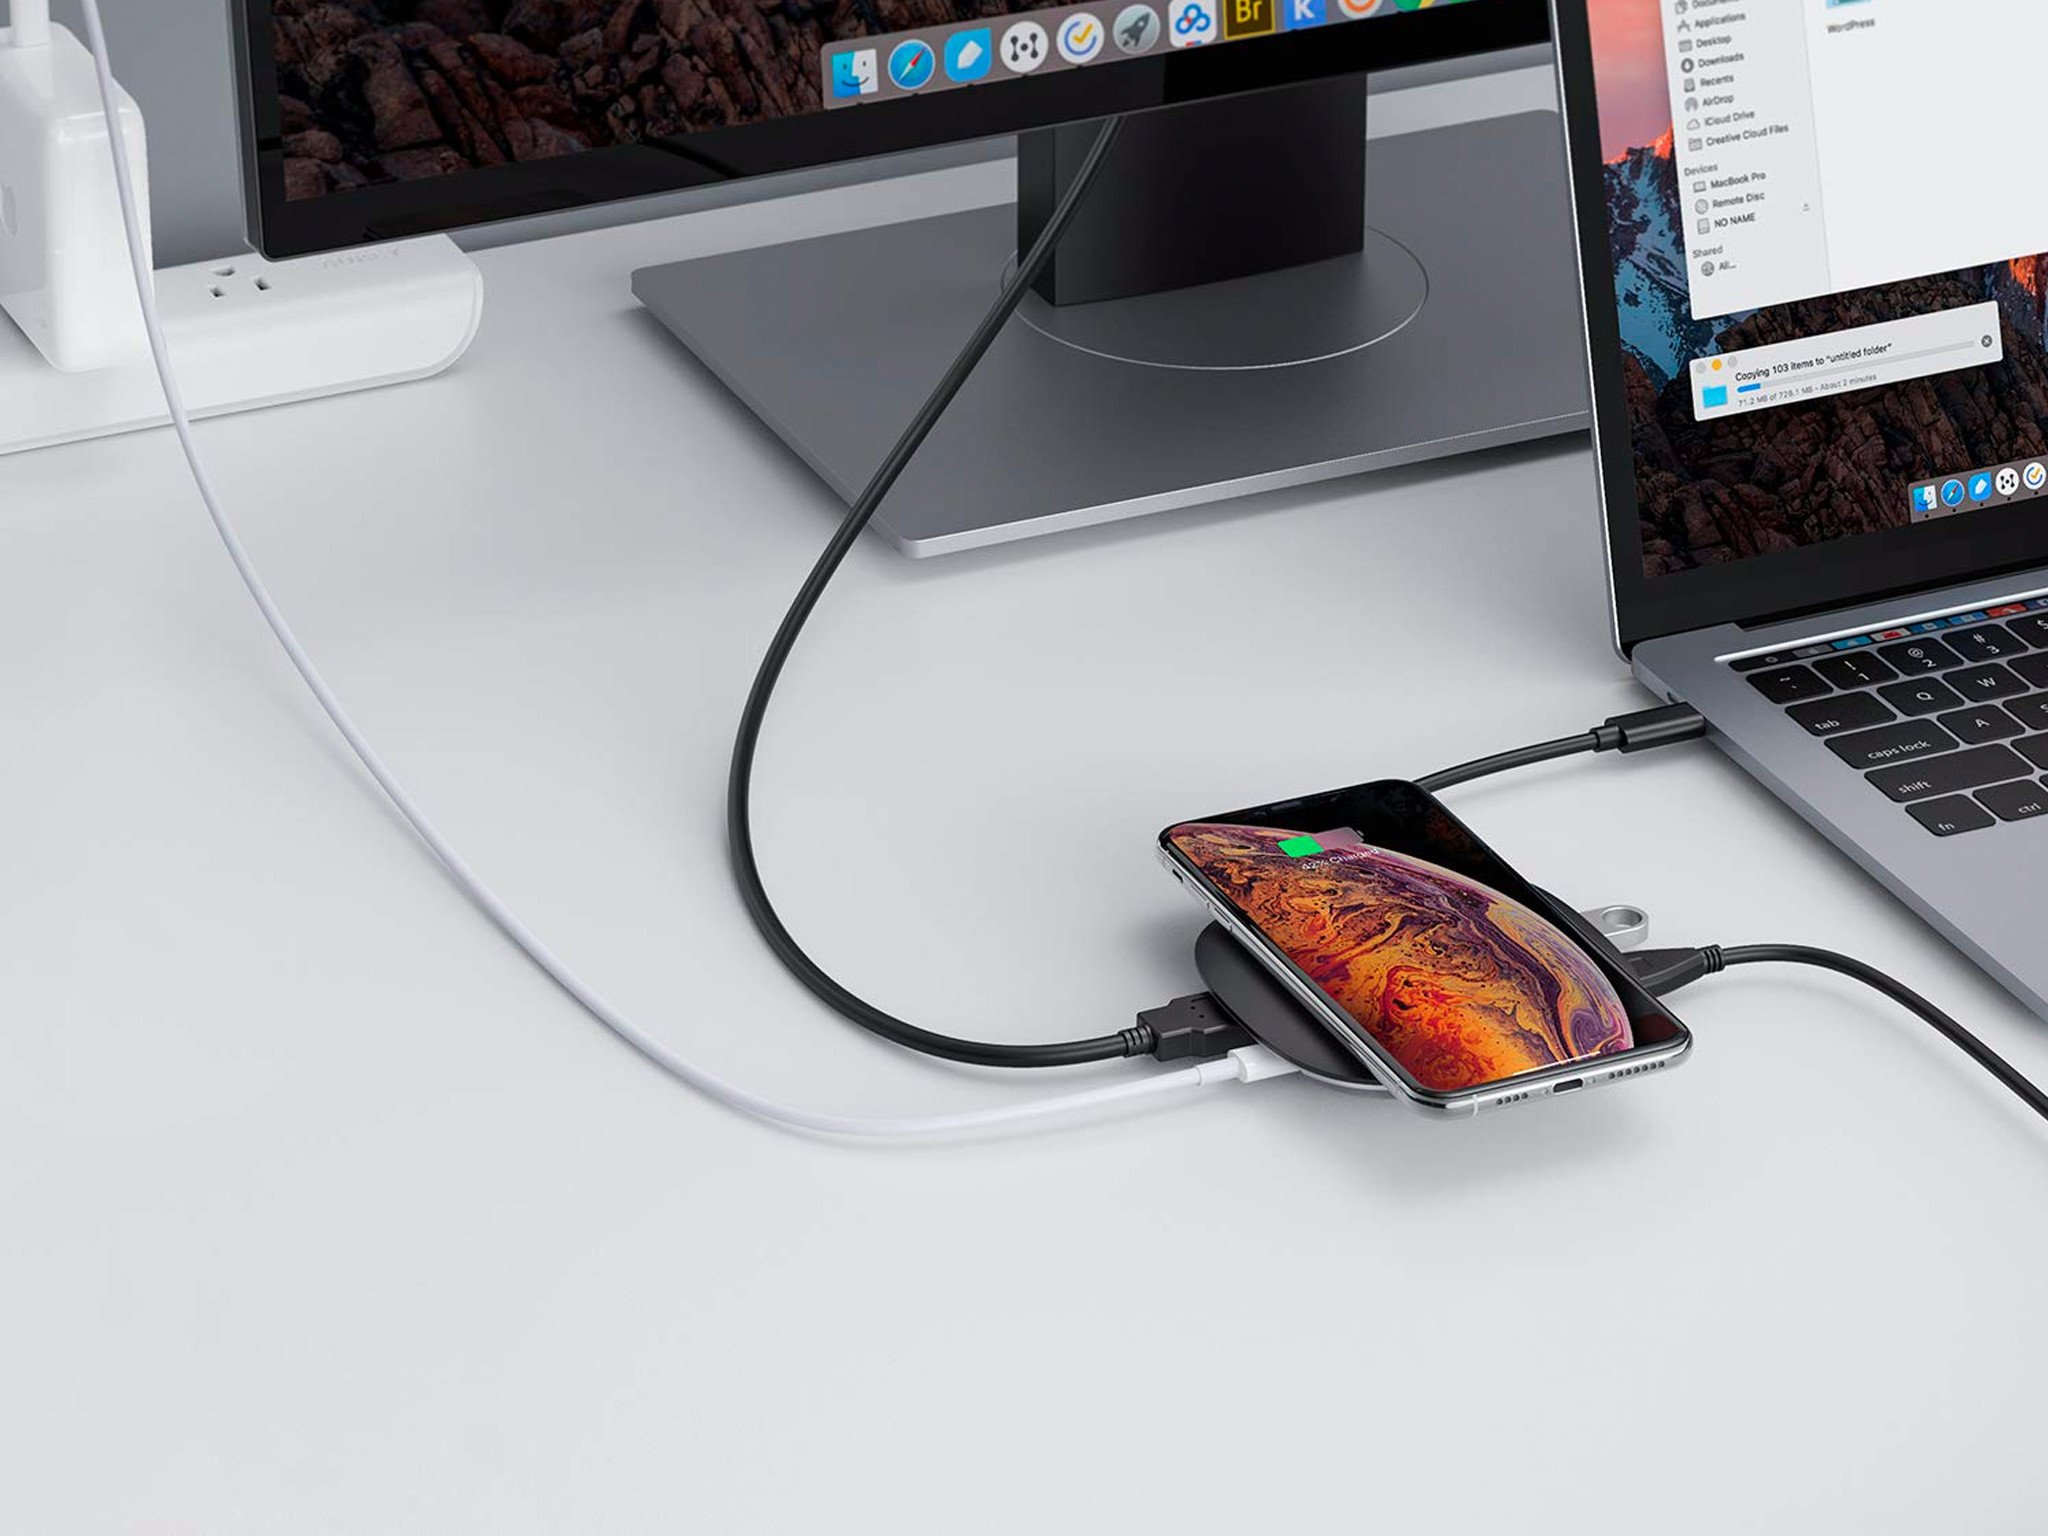 Aukey's 5-in-1 USB-C hub featuring a built-in wireless charger is